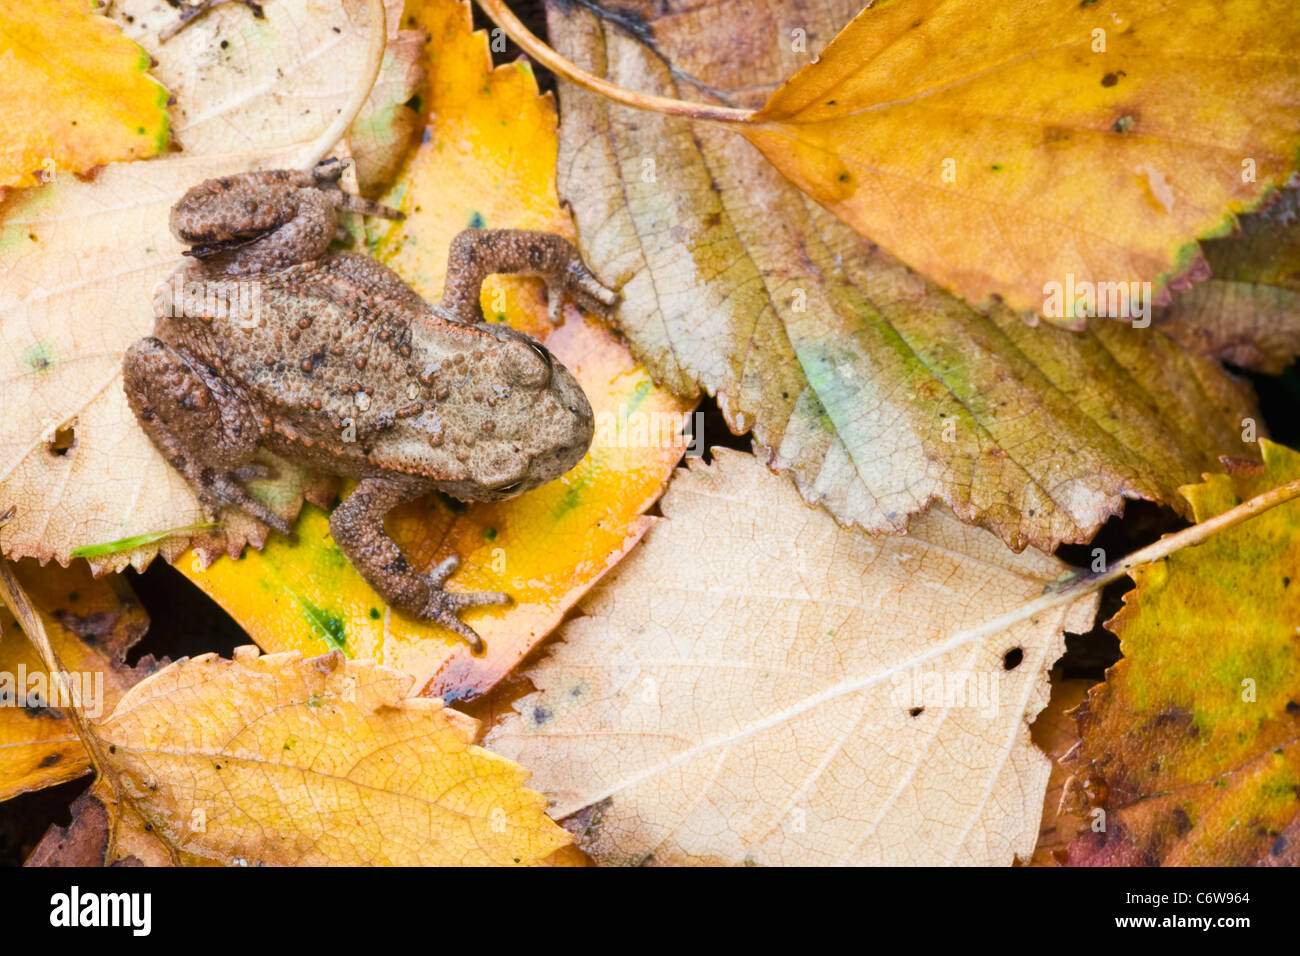 Juvenile Common Toad with autumn leaves Stock Photo